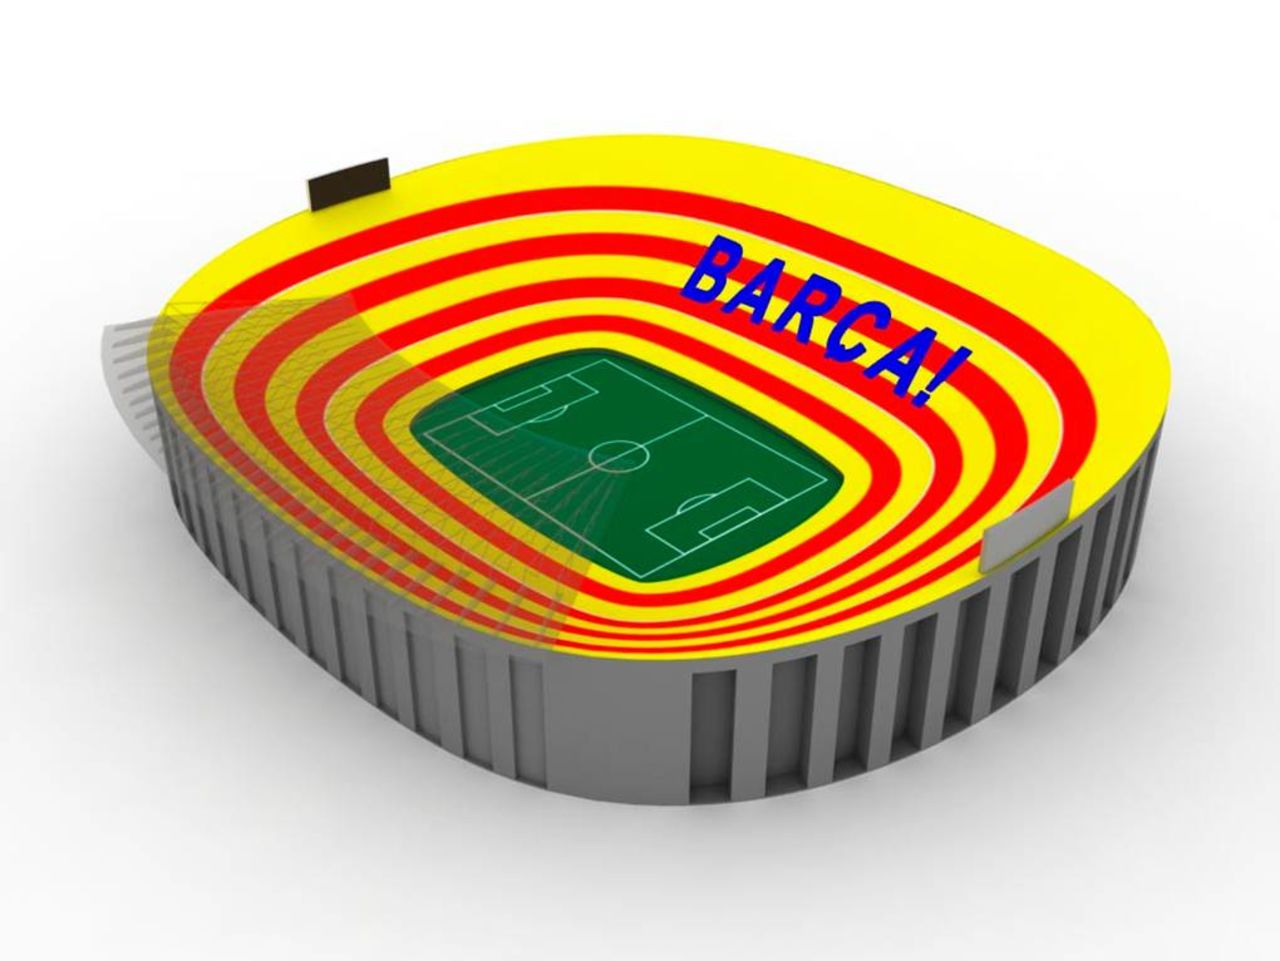 Barcelona's Nou Camp stadium will be transformed into a giant Catalan flag prior to kick off in Sunday's "El Clasico" match against Real Madrid. A total of 98,000 placards will proudly display bands of red and gold.